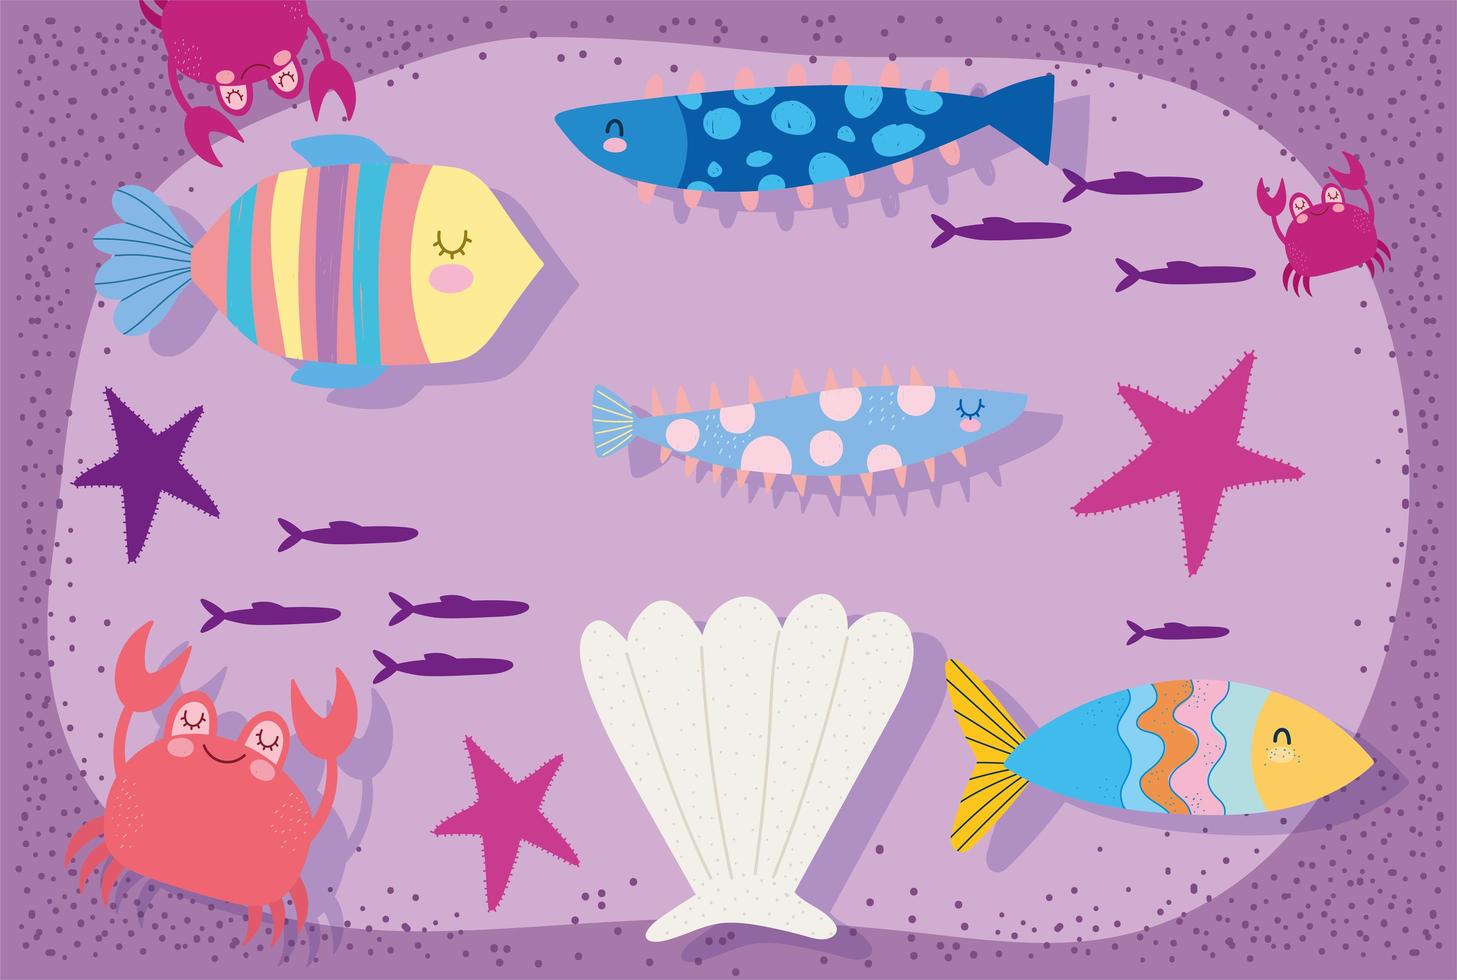 Fishes shell starfishes crab scene vector